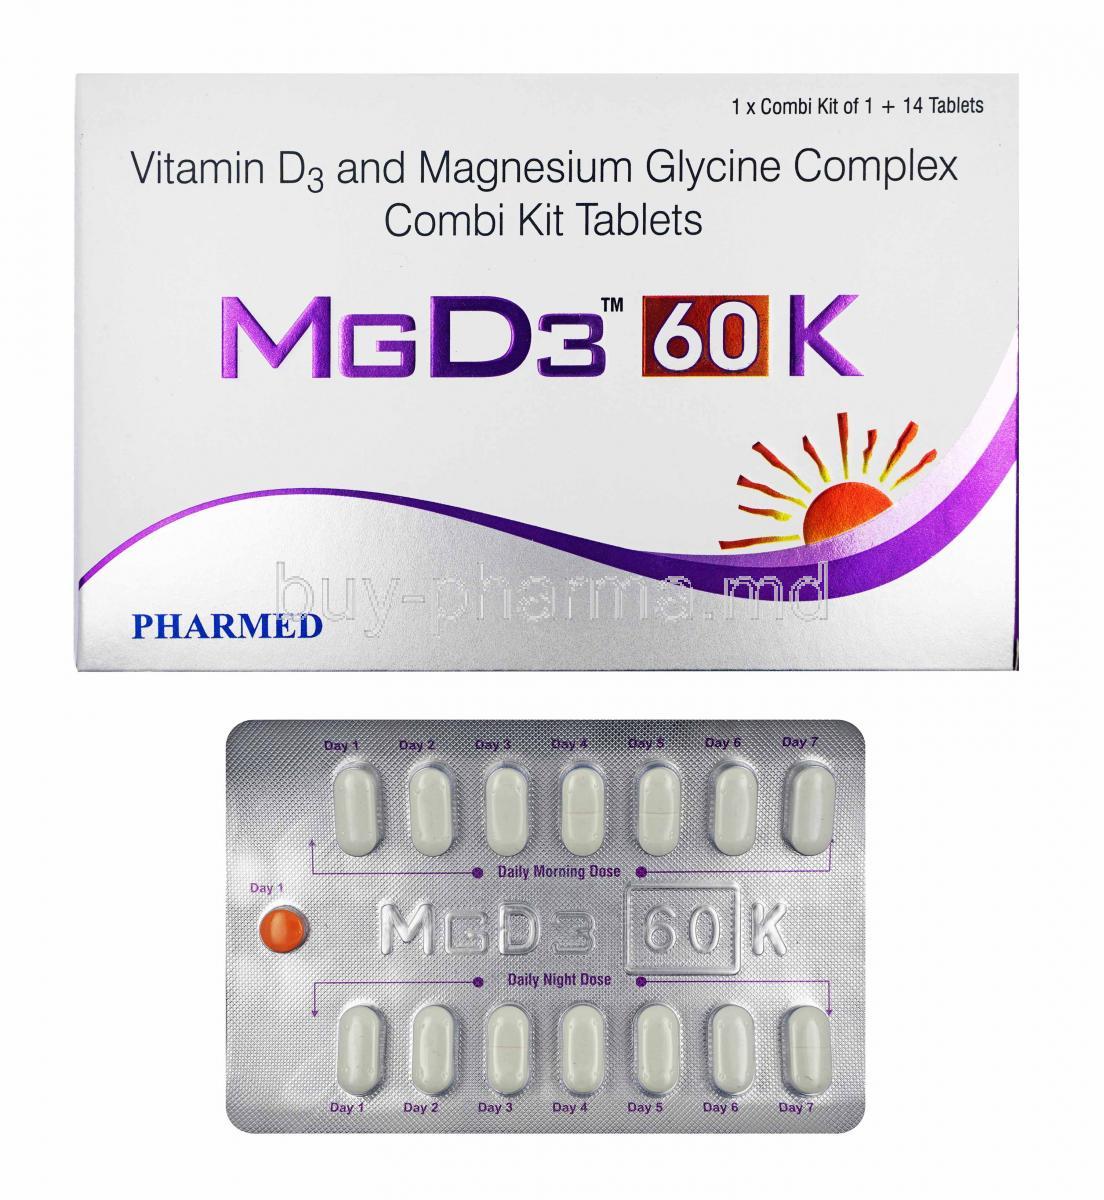 MGD3 60K Combi Kit, Vitamin D3 and Magnesium box and tablets